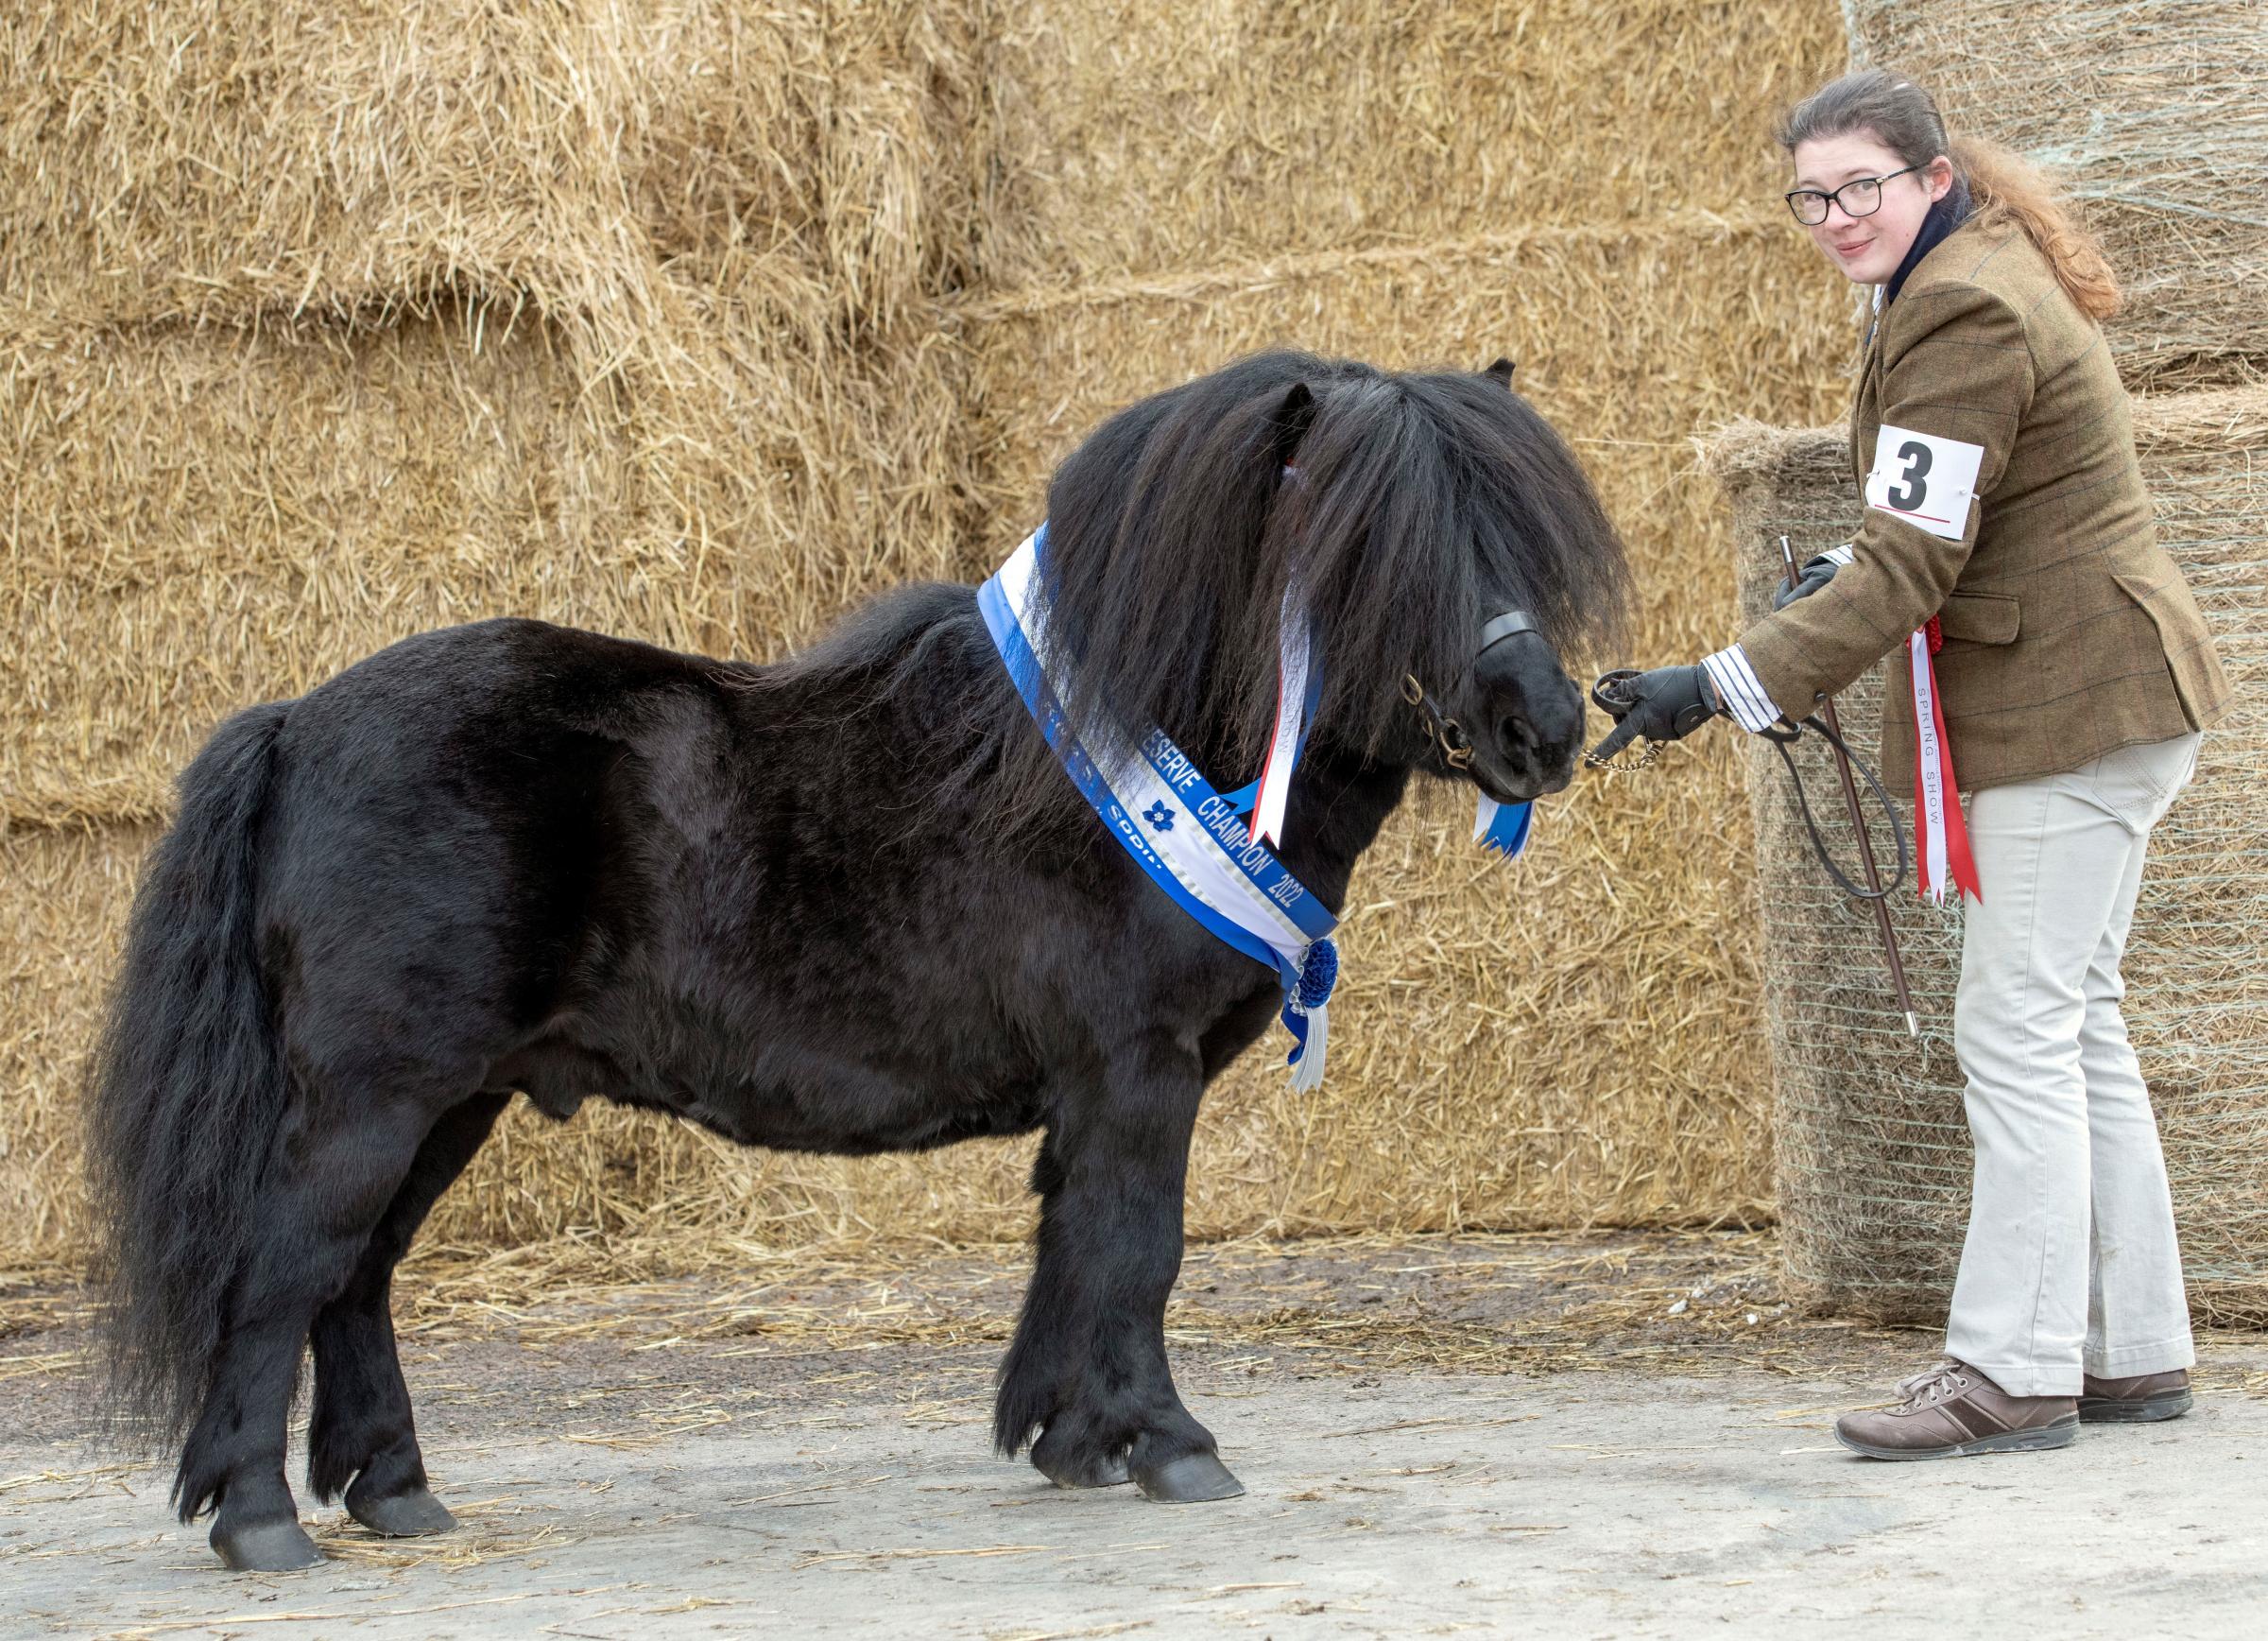 Shetland pony champion and reserve overall horse overall champion was Wells Legend, from HP Sleigh and Son